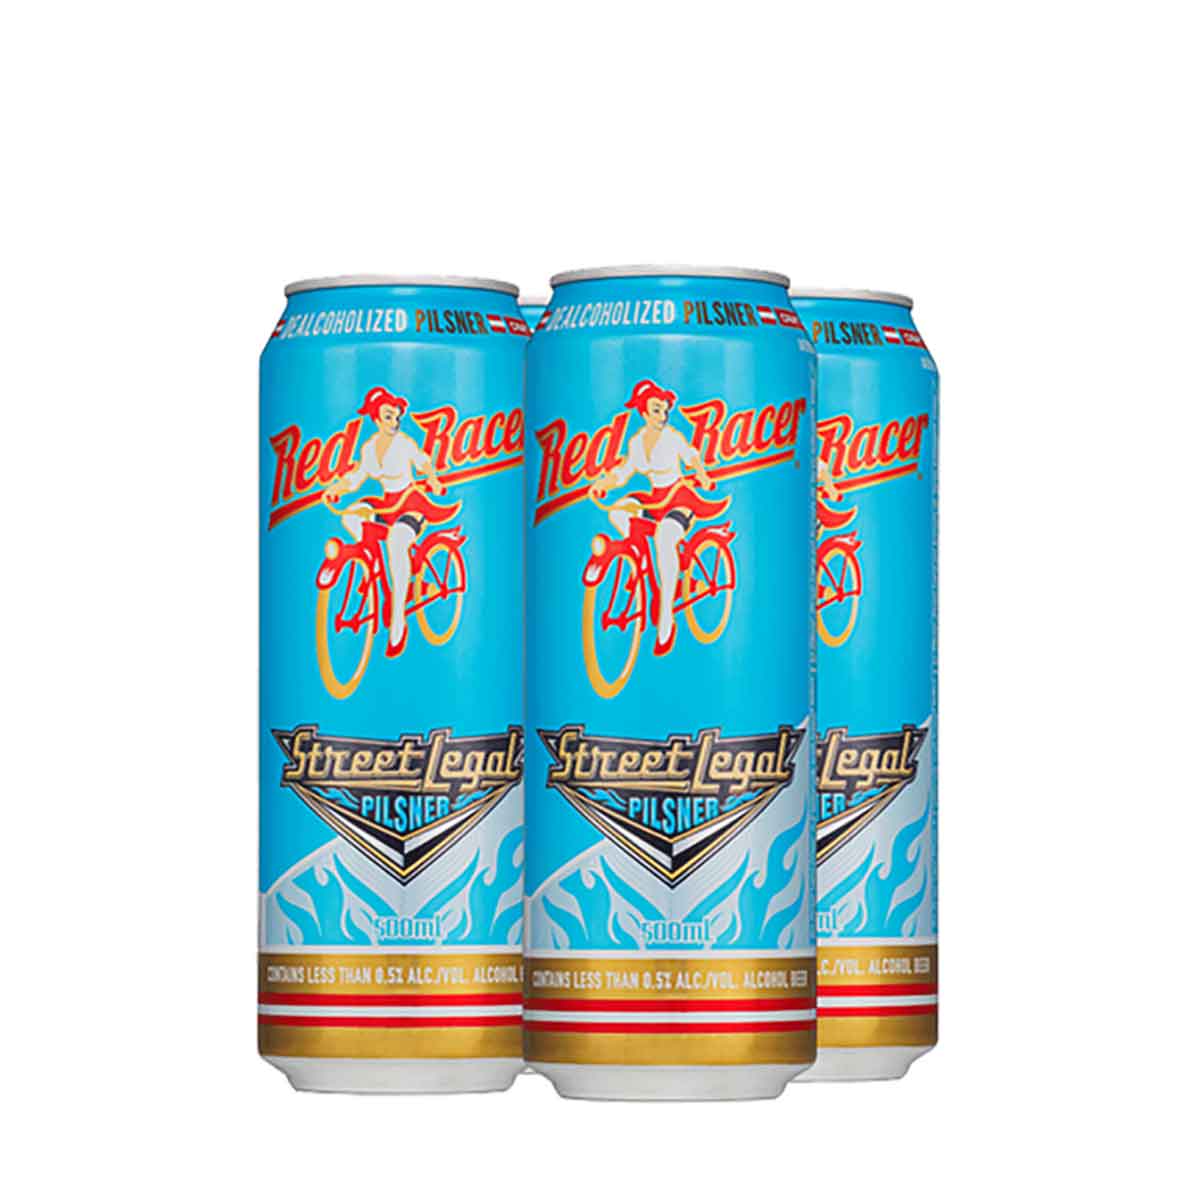 TAG Liquor Stores BC-RED RACER STREET LEGAL DEALCOHOLIZED PILSNER 4 PACK TALL CANS